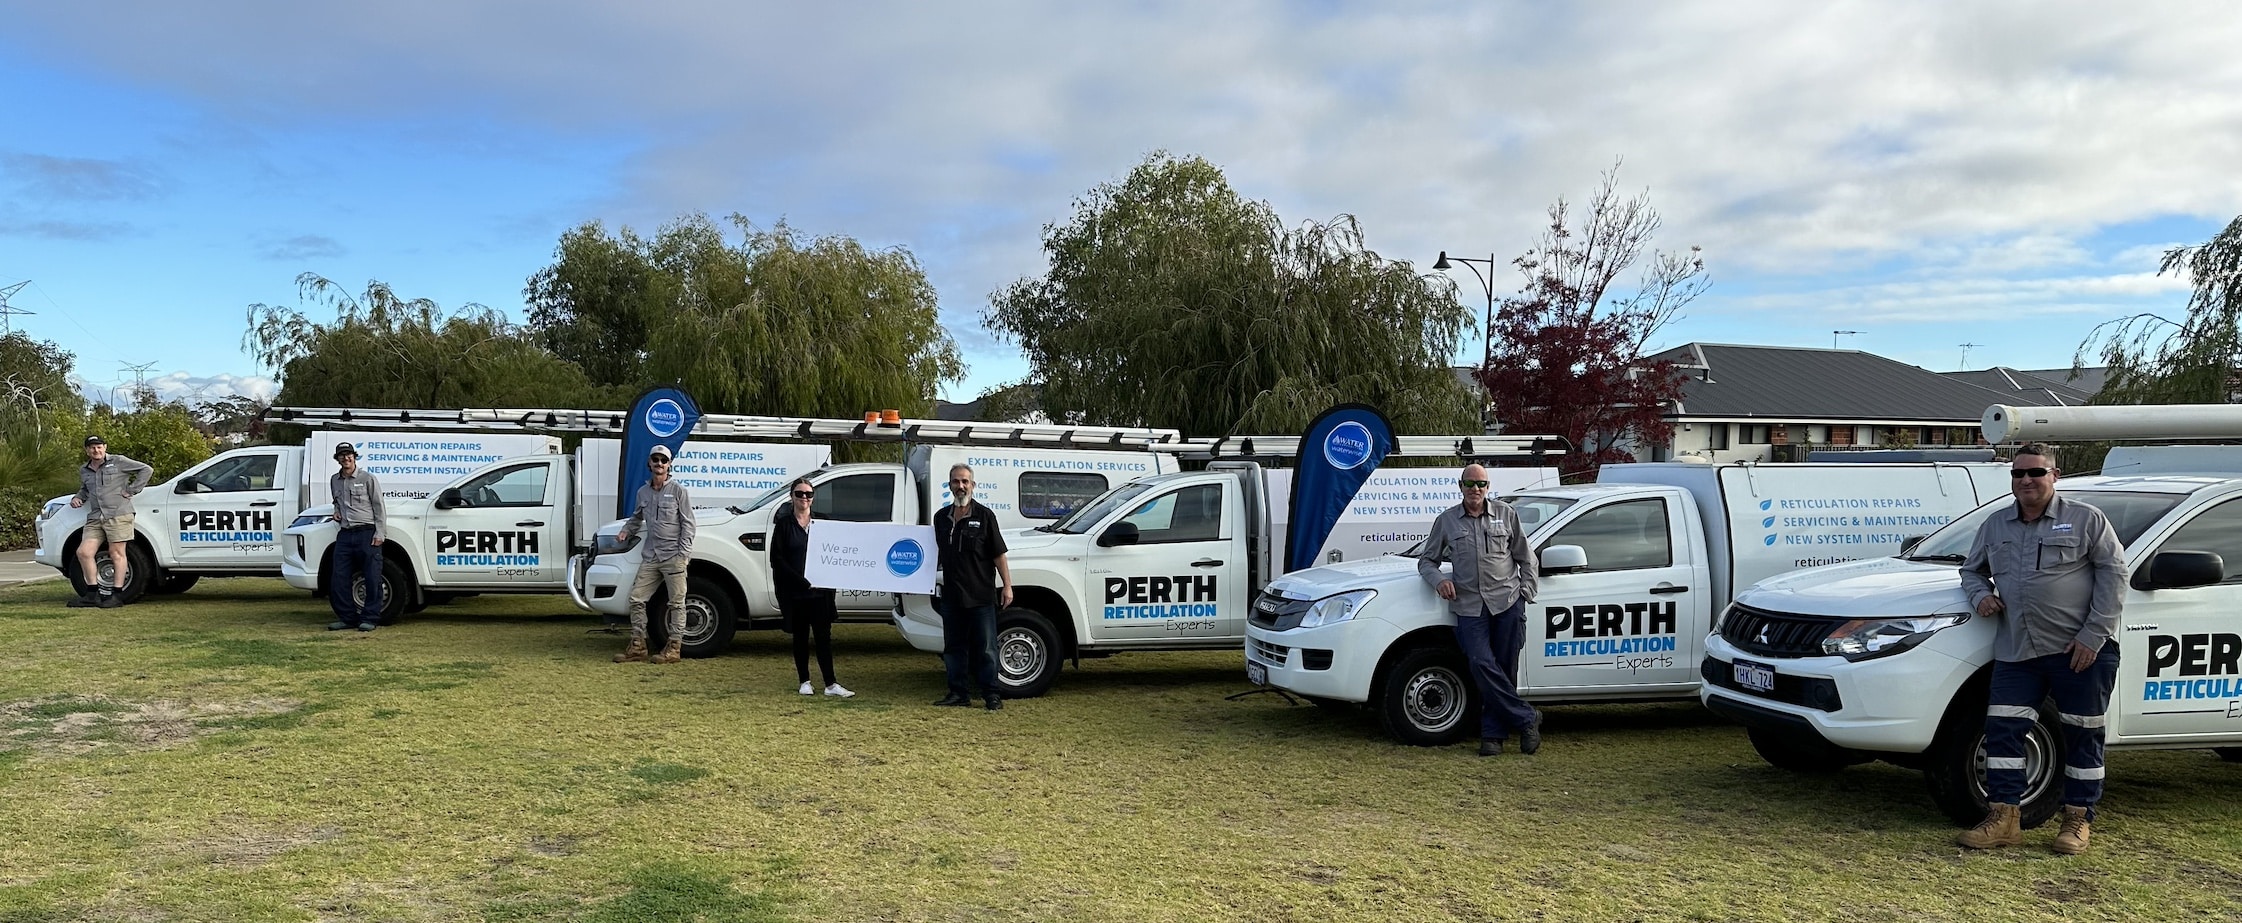 fleet of reticulation vehicles and technicians in perth